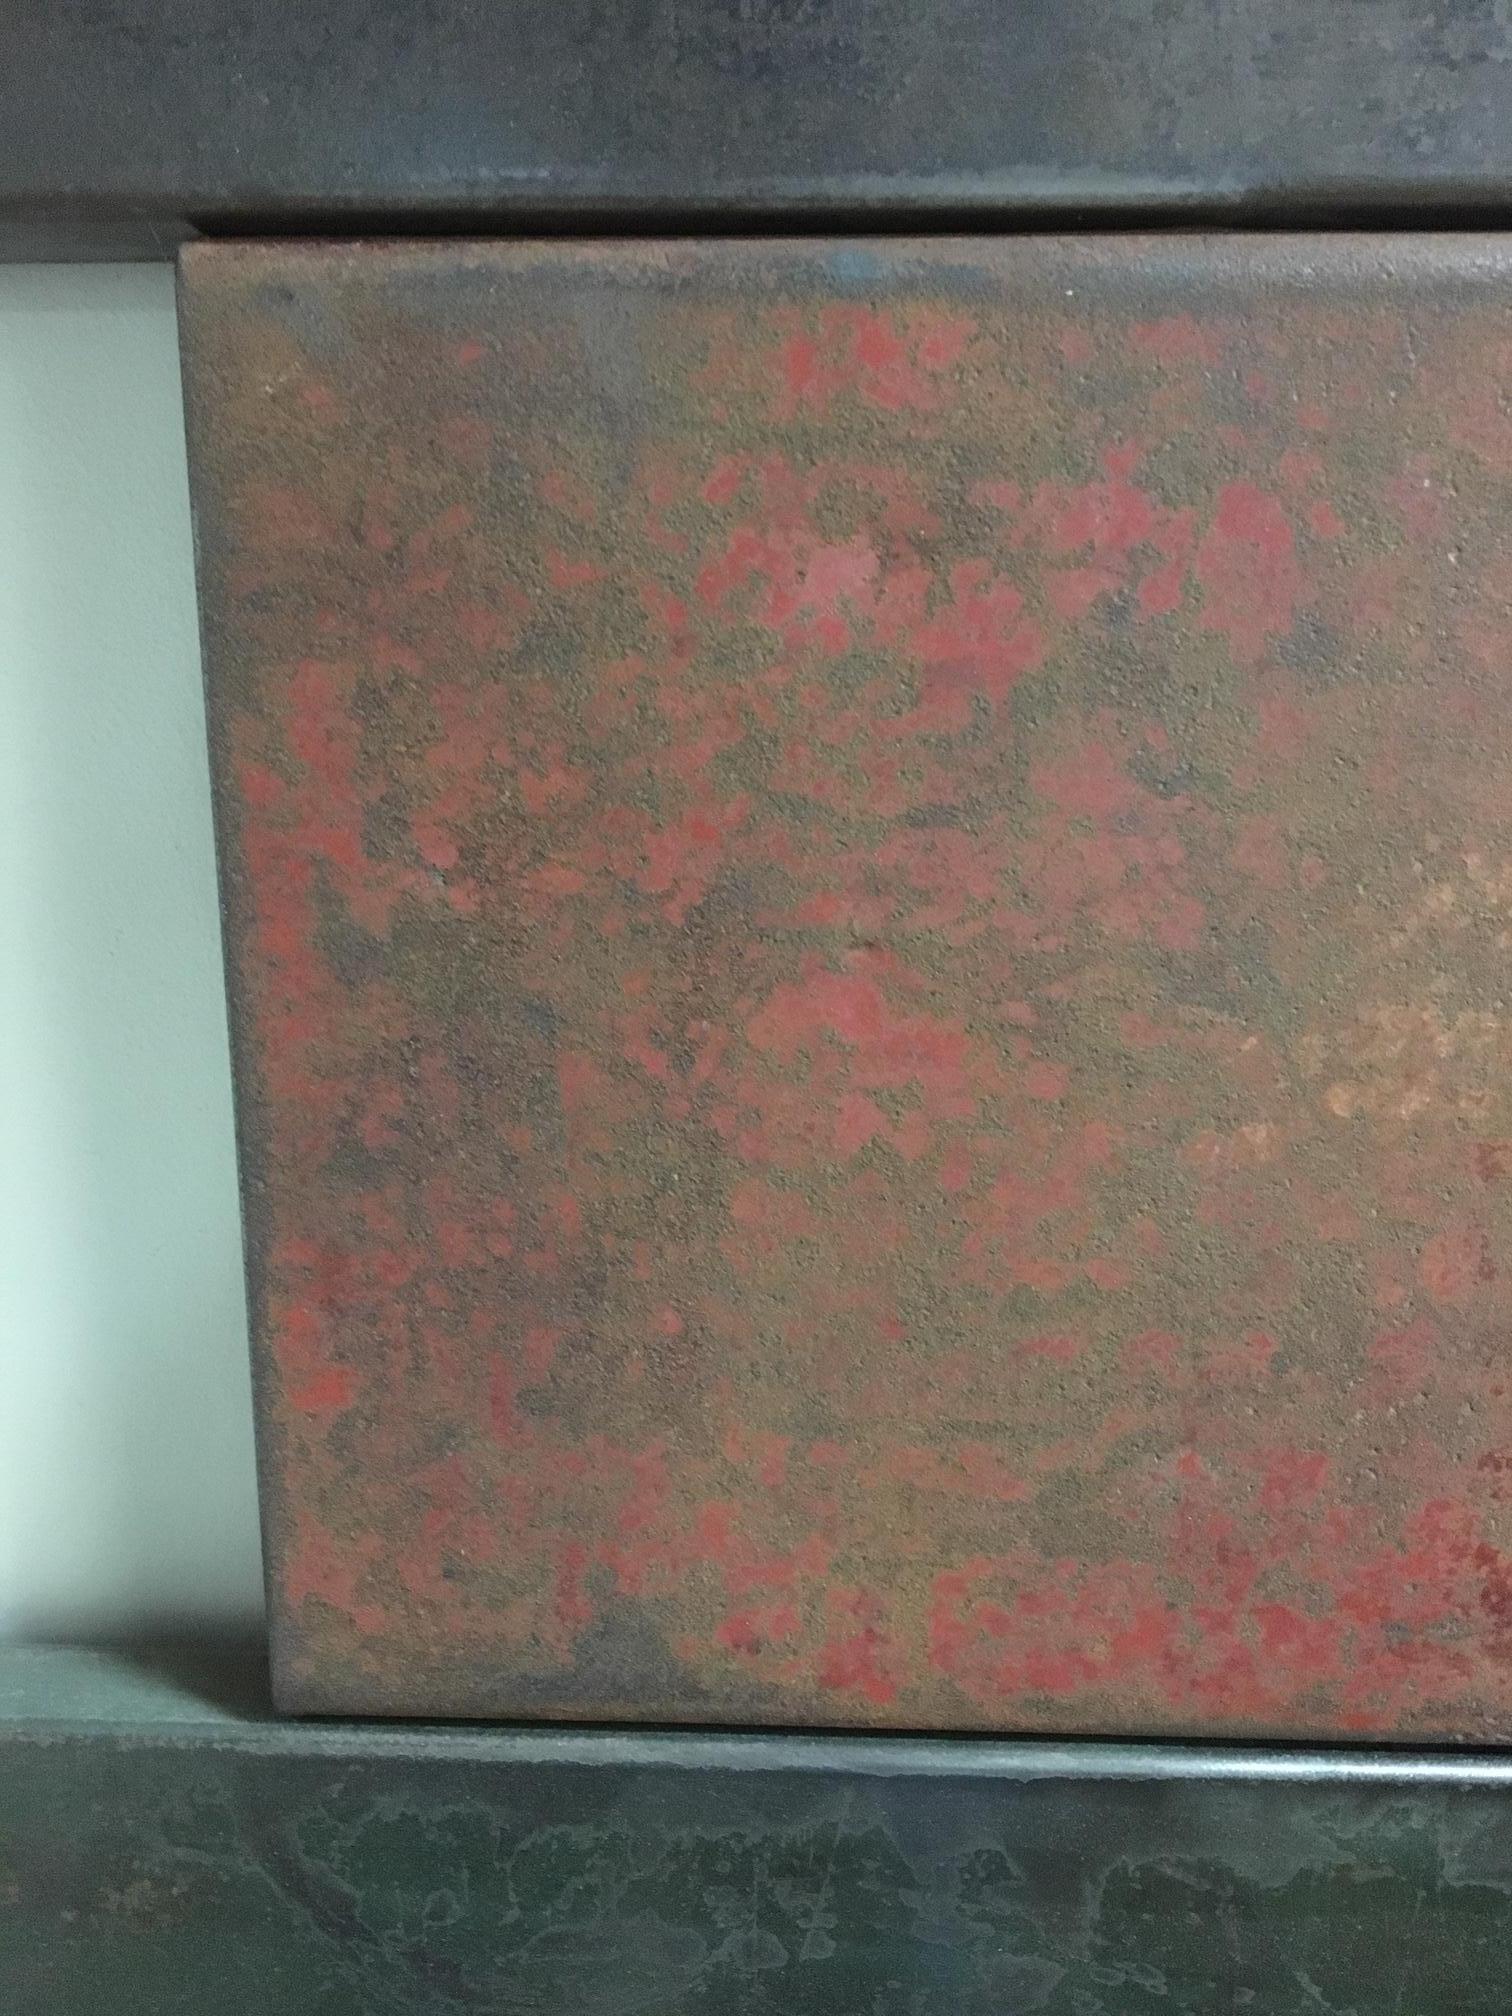 Red Center
found sheet metal
33.5 x 36 in.

Artist statement

I seldom use stock material, but prefer distressed and rusted steel that has been scarred, bent, and made imperfect. In this state, the material becomes quite beautiful. There are